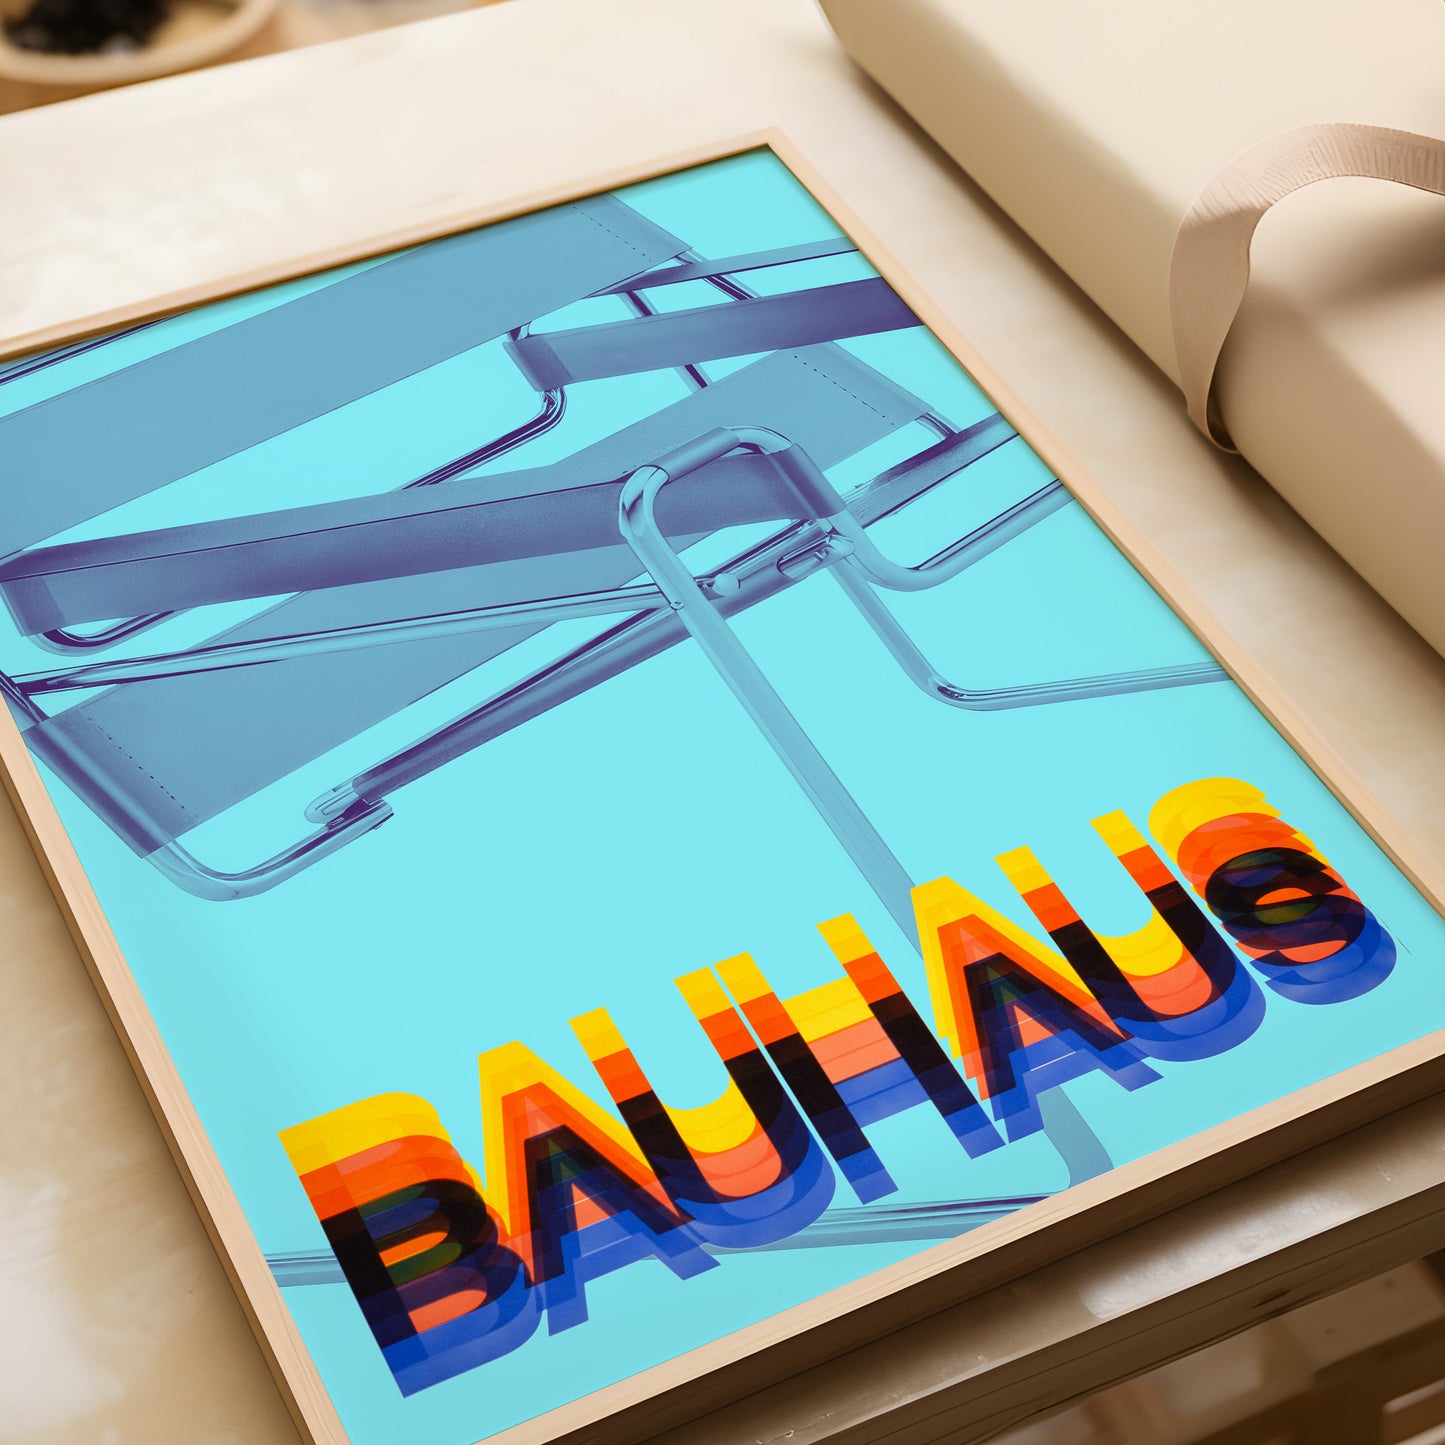 The Chair | Vintage Bauhaus Exhibition Poster Color Pop Andy Warhol Style (available framed or unframed)